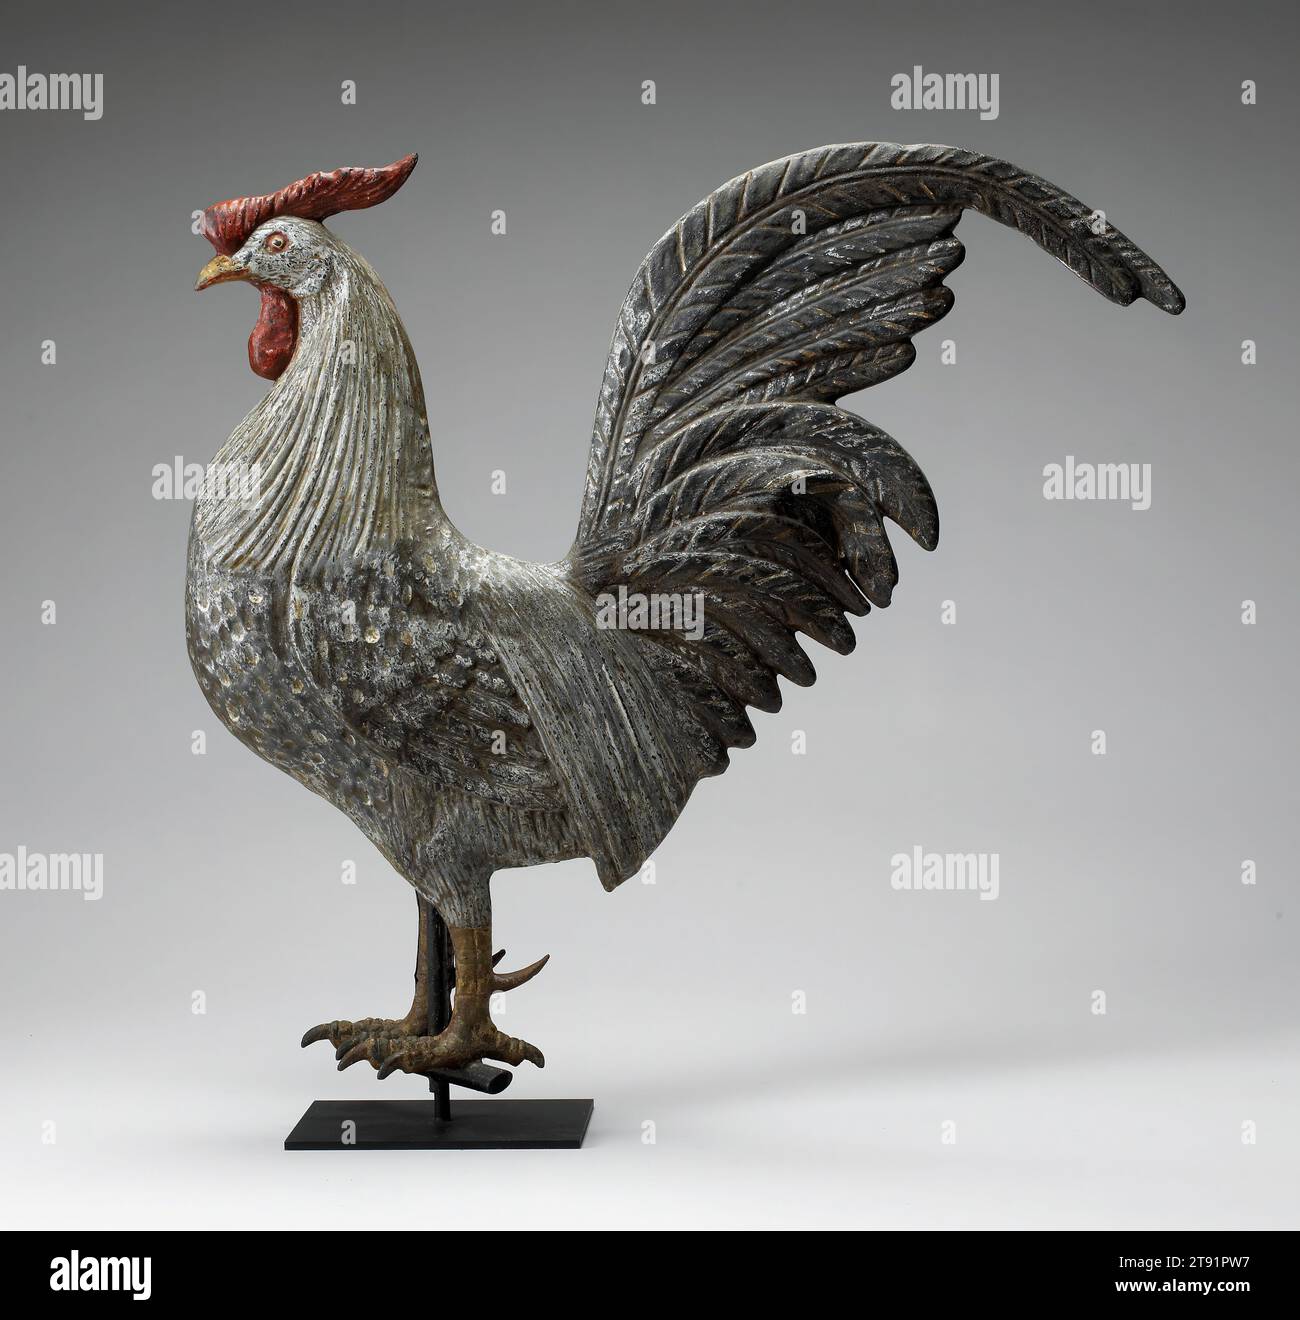 Hamburg Rooster weathervane, c. 1880, L.W. Cushing & Sons, American, Waltham, Massachusetts, 1872–1933, 27 1/2 x 27 3/4 x 4 7/16 in. (69.85 x 70.49 x 11.27 cm), Copper, pigment, United States, 19th century, Nineteenth century American farmers developed an astonishing variety of poultry crossbreeds - highly specific kinds of birds raised for meat, eggs, or even appearance. Weathervane makers catered to this popularity by developing breed specific vanes such as this Hamburg Rooster. This rooster's magnificently swept back comb and tail would have given the illusion of a brisk wind Stock Photo